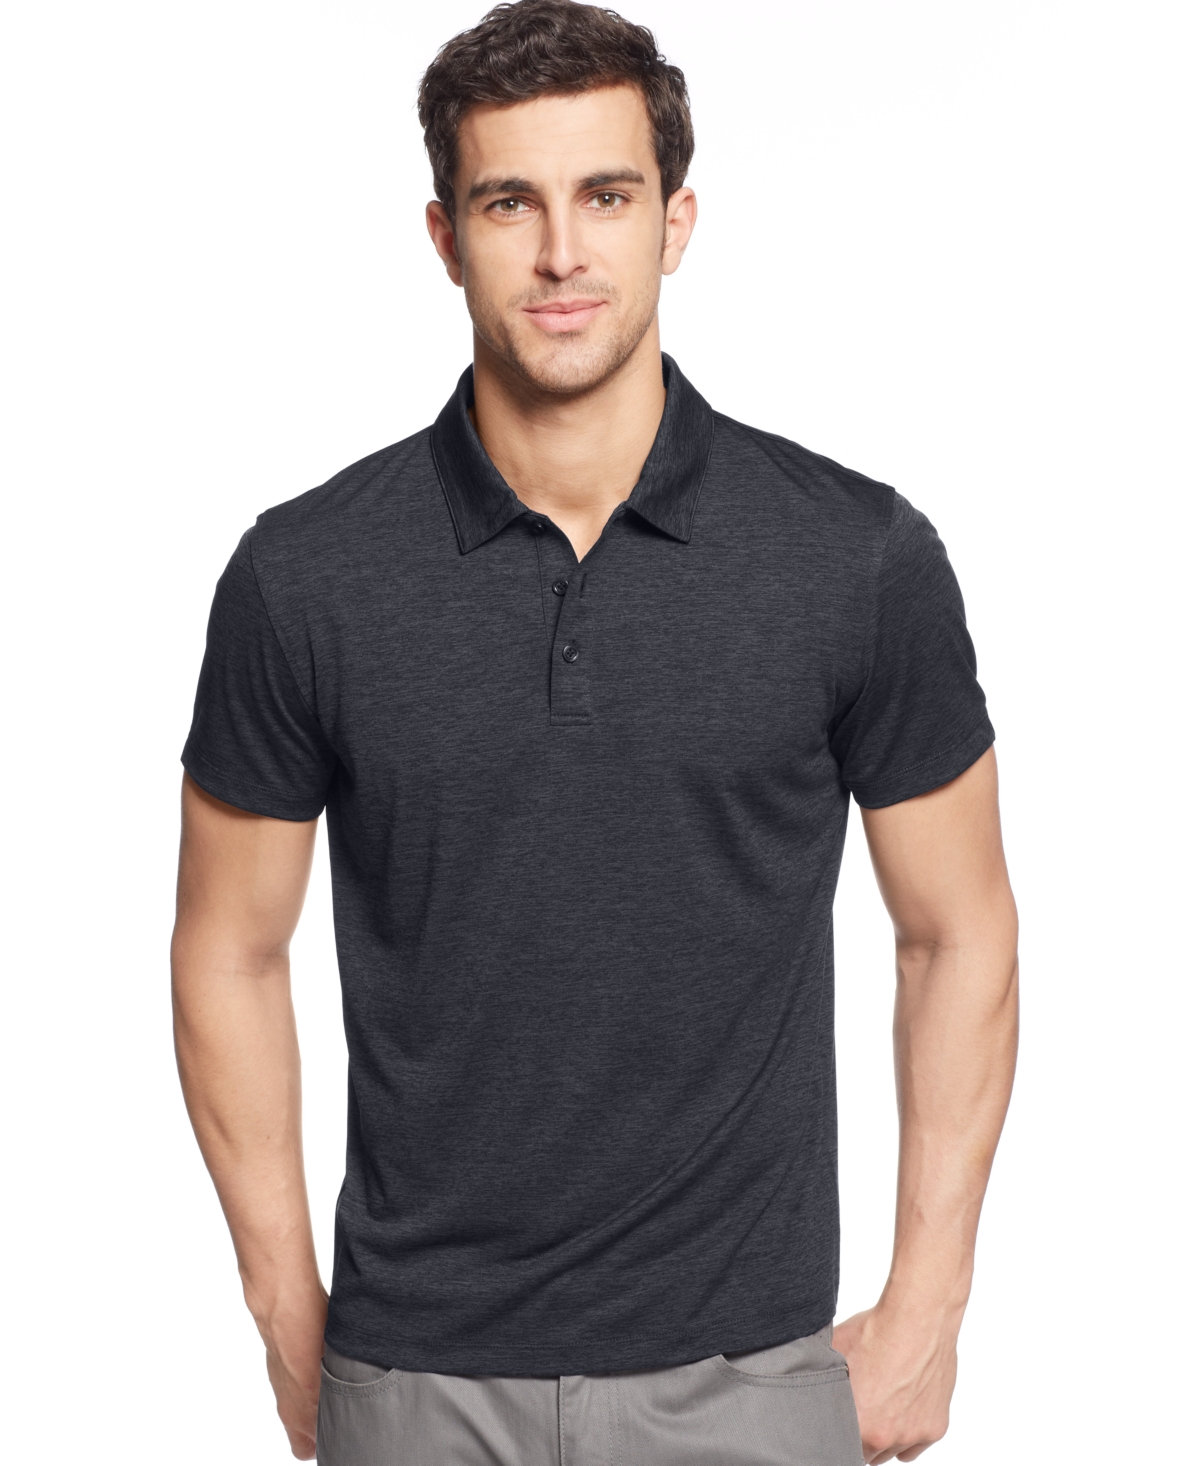 Men's Classic-Fit Ethan Performance Polo, Created for Macy's - Peacock Plum